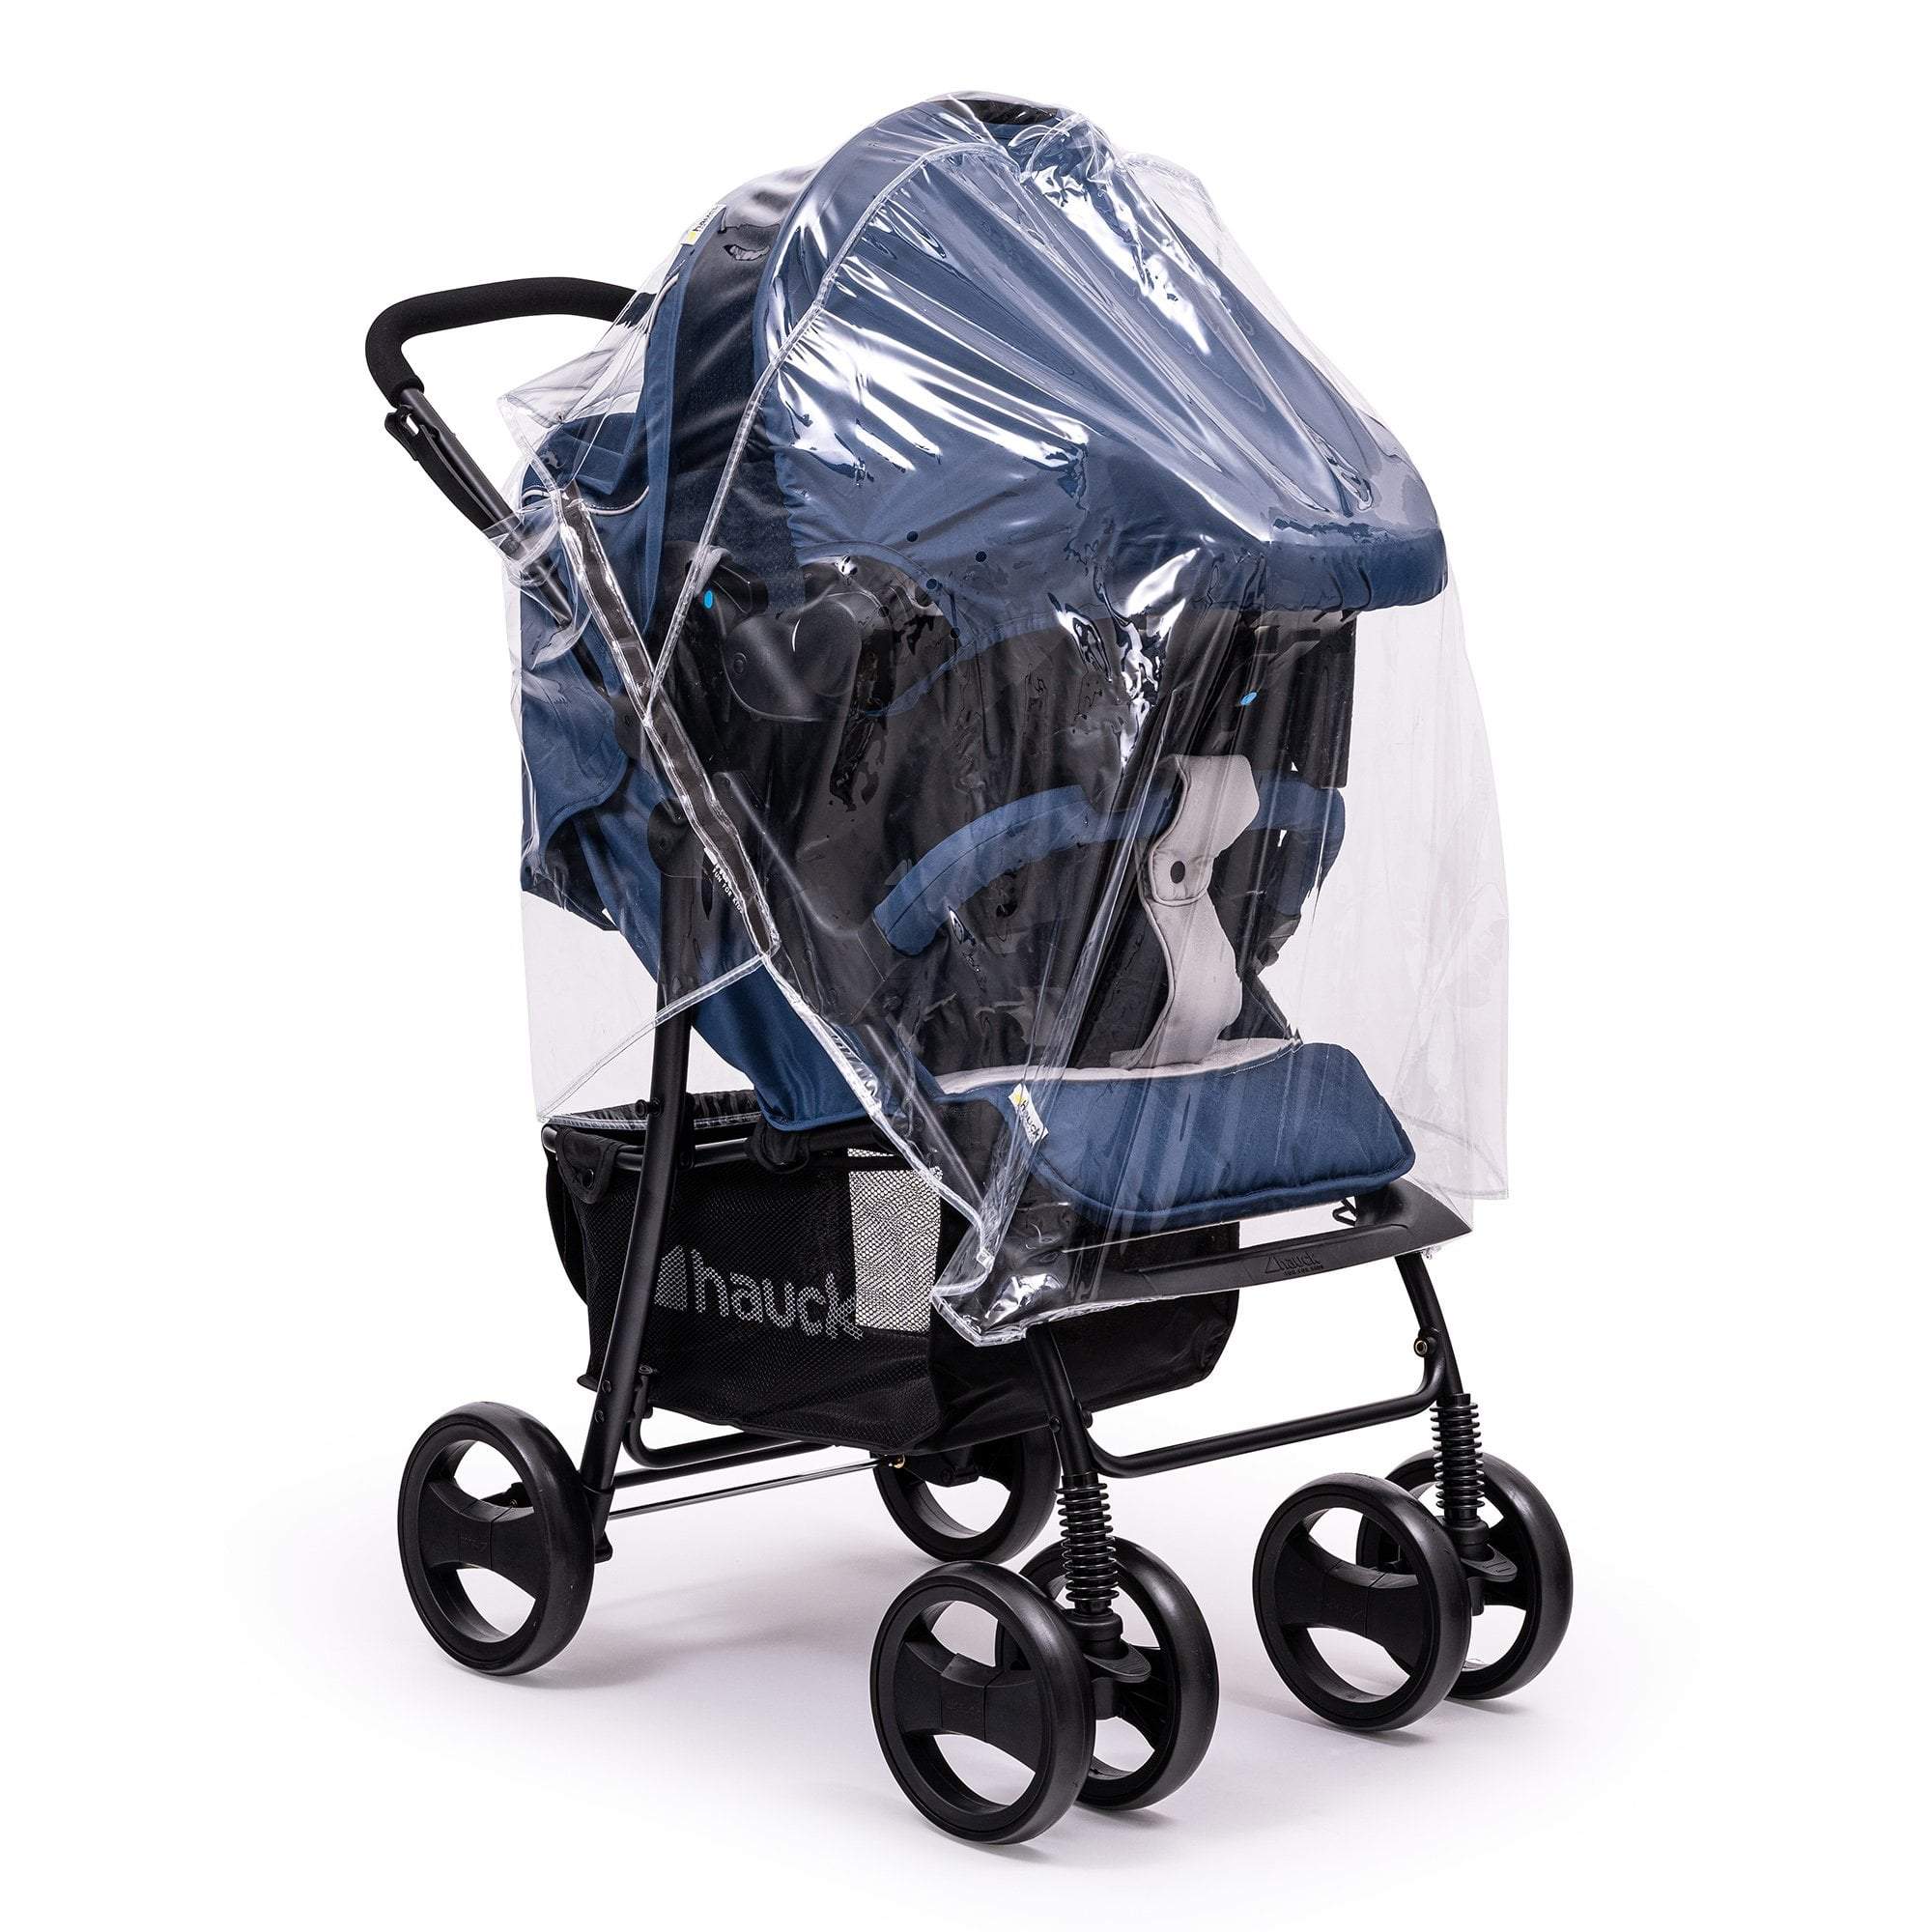 Travel System Raincover Compatible with BabiesRus - Fits All Models - For Your Little One